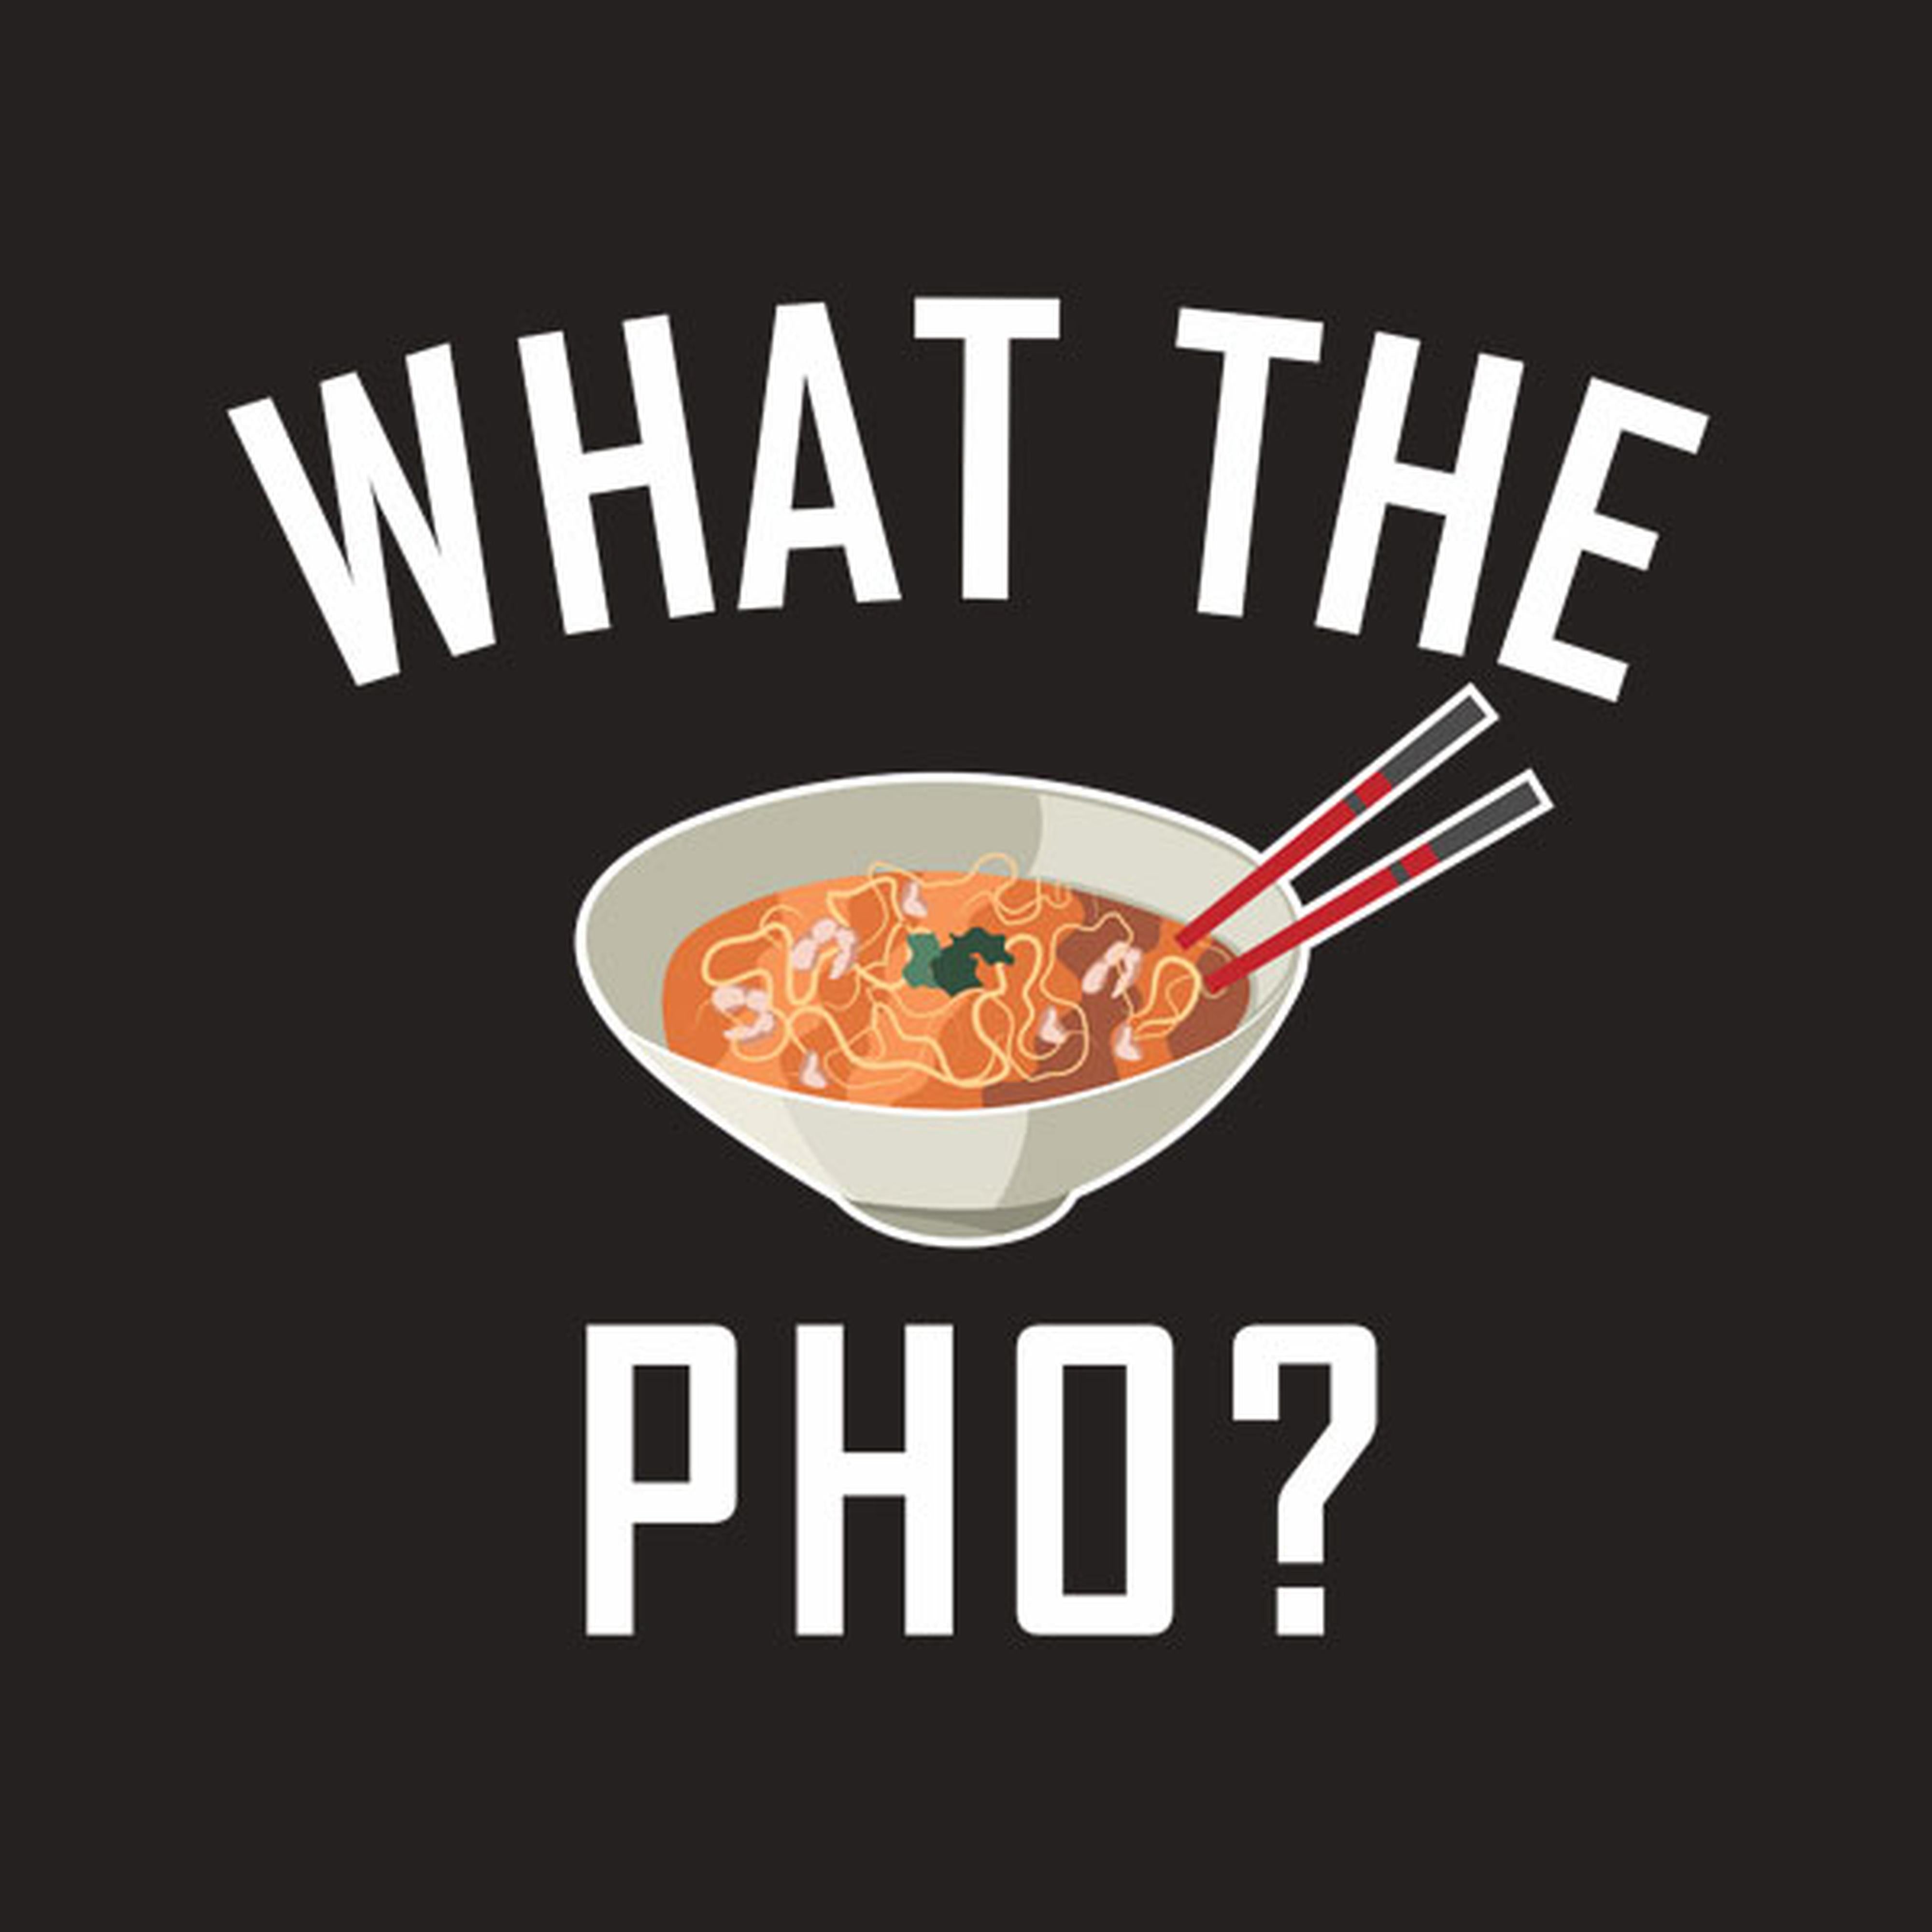 What the PHO? - T-shirt